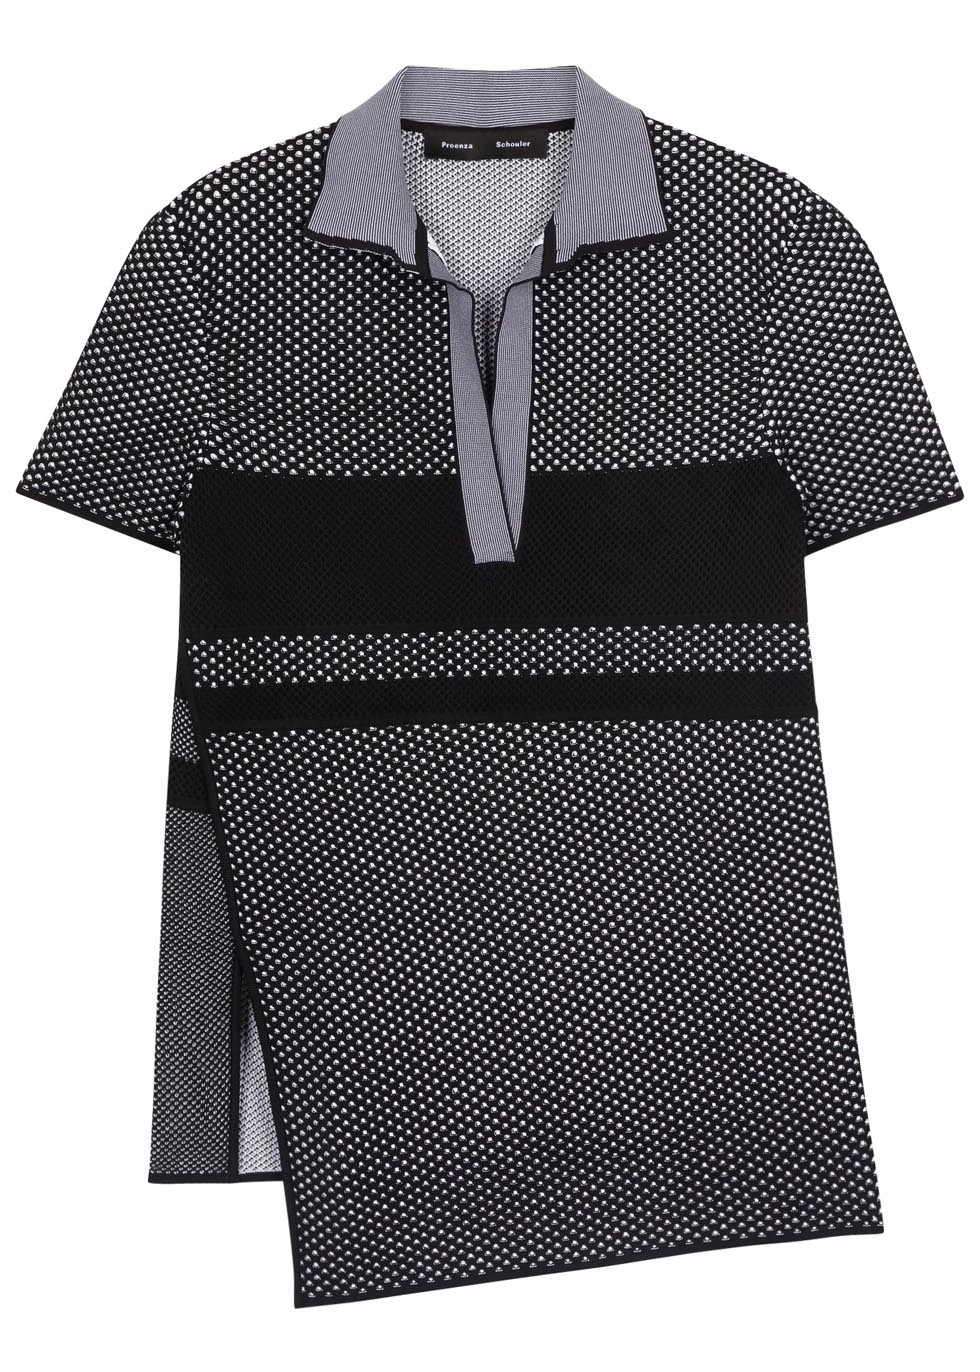 Monochrome perforated knitted polo shirt